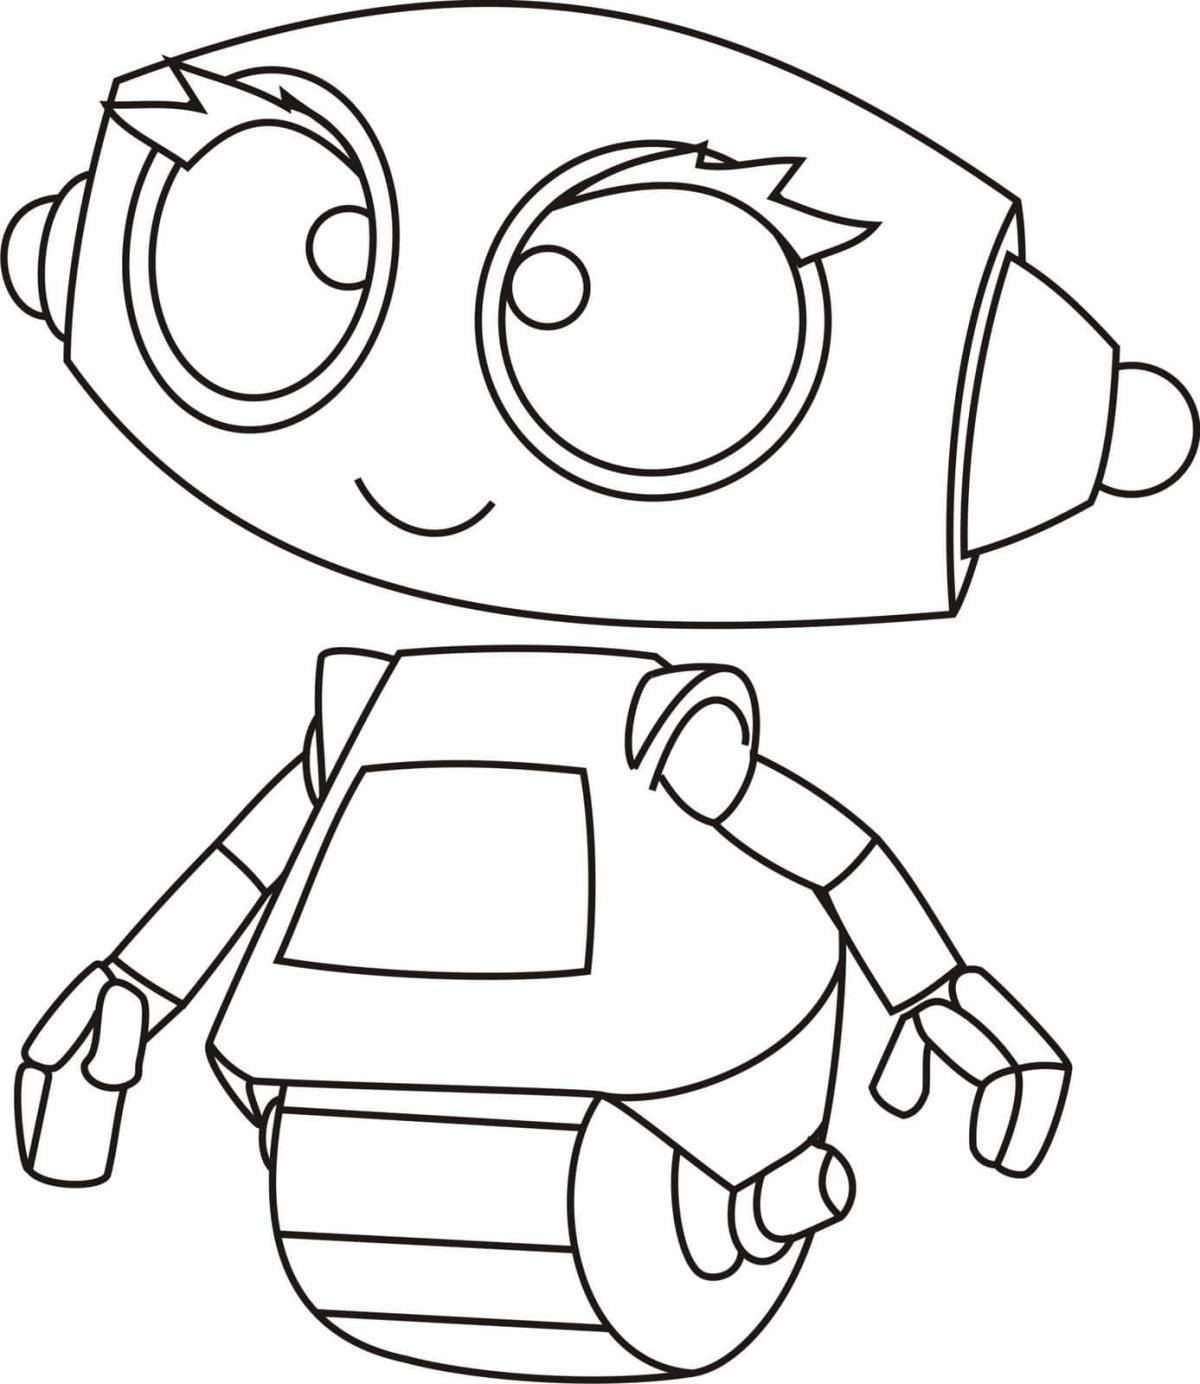 Exciting robot coloring page